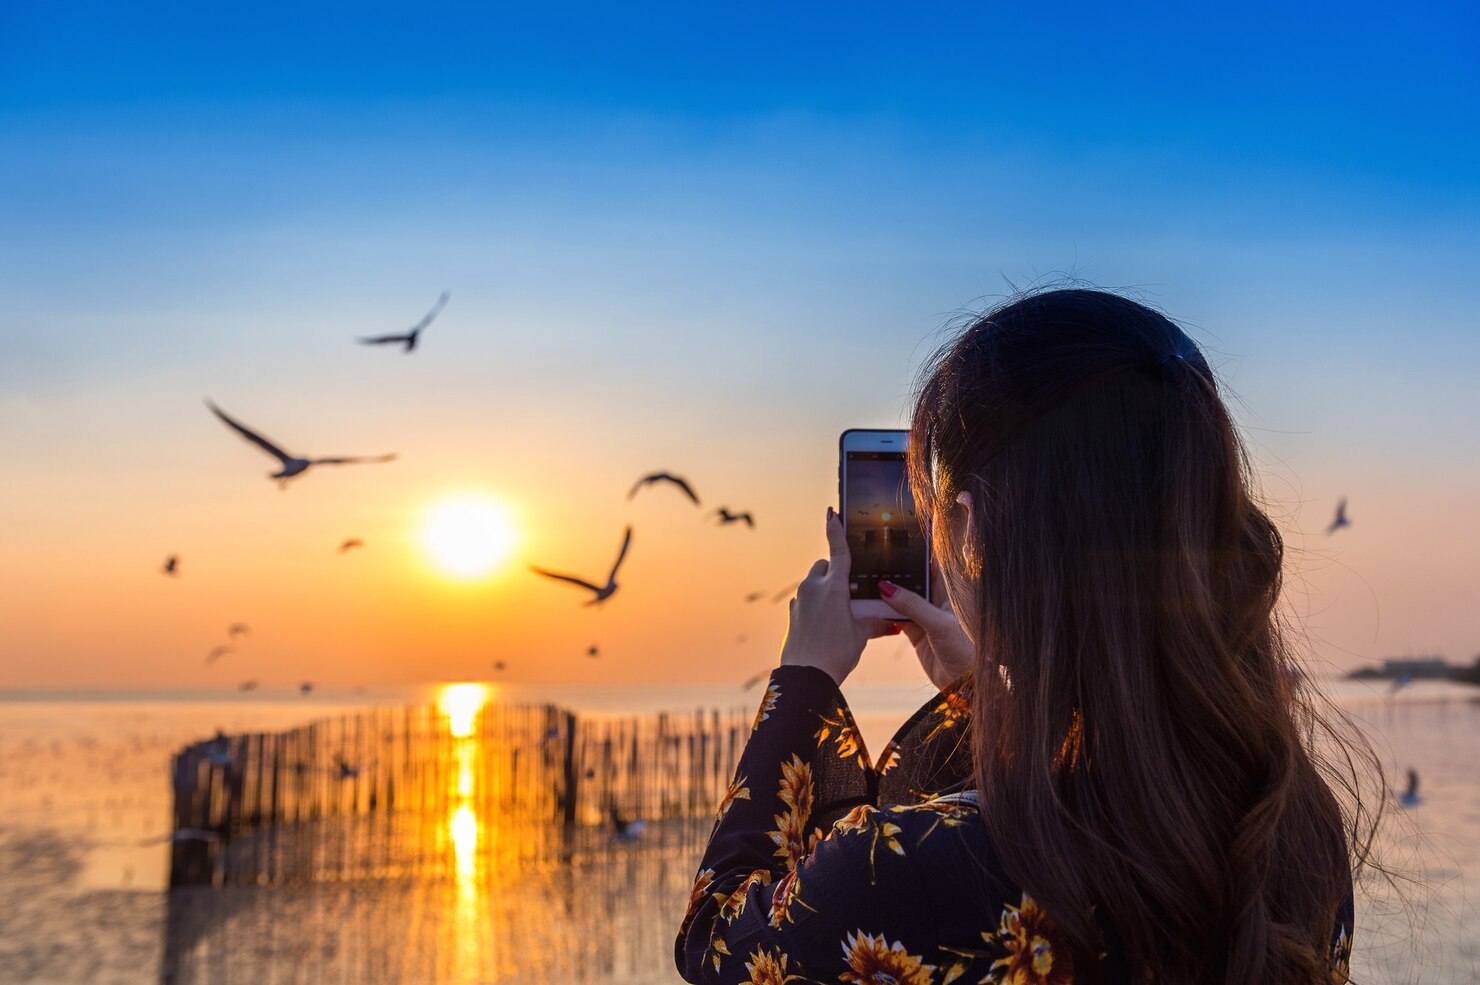 A girl taking a Snap of birds flying at sunset.